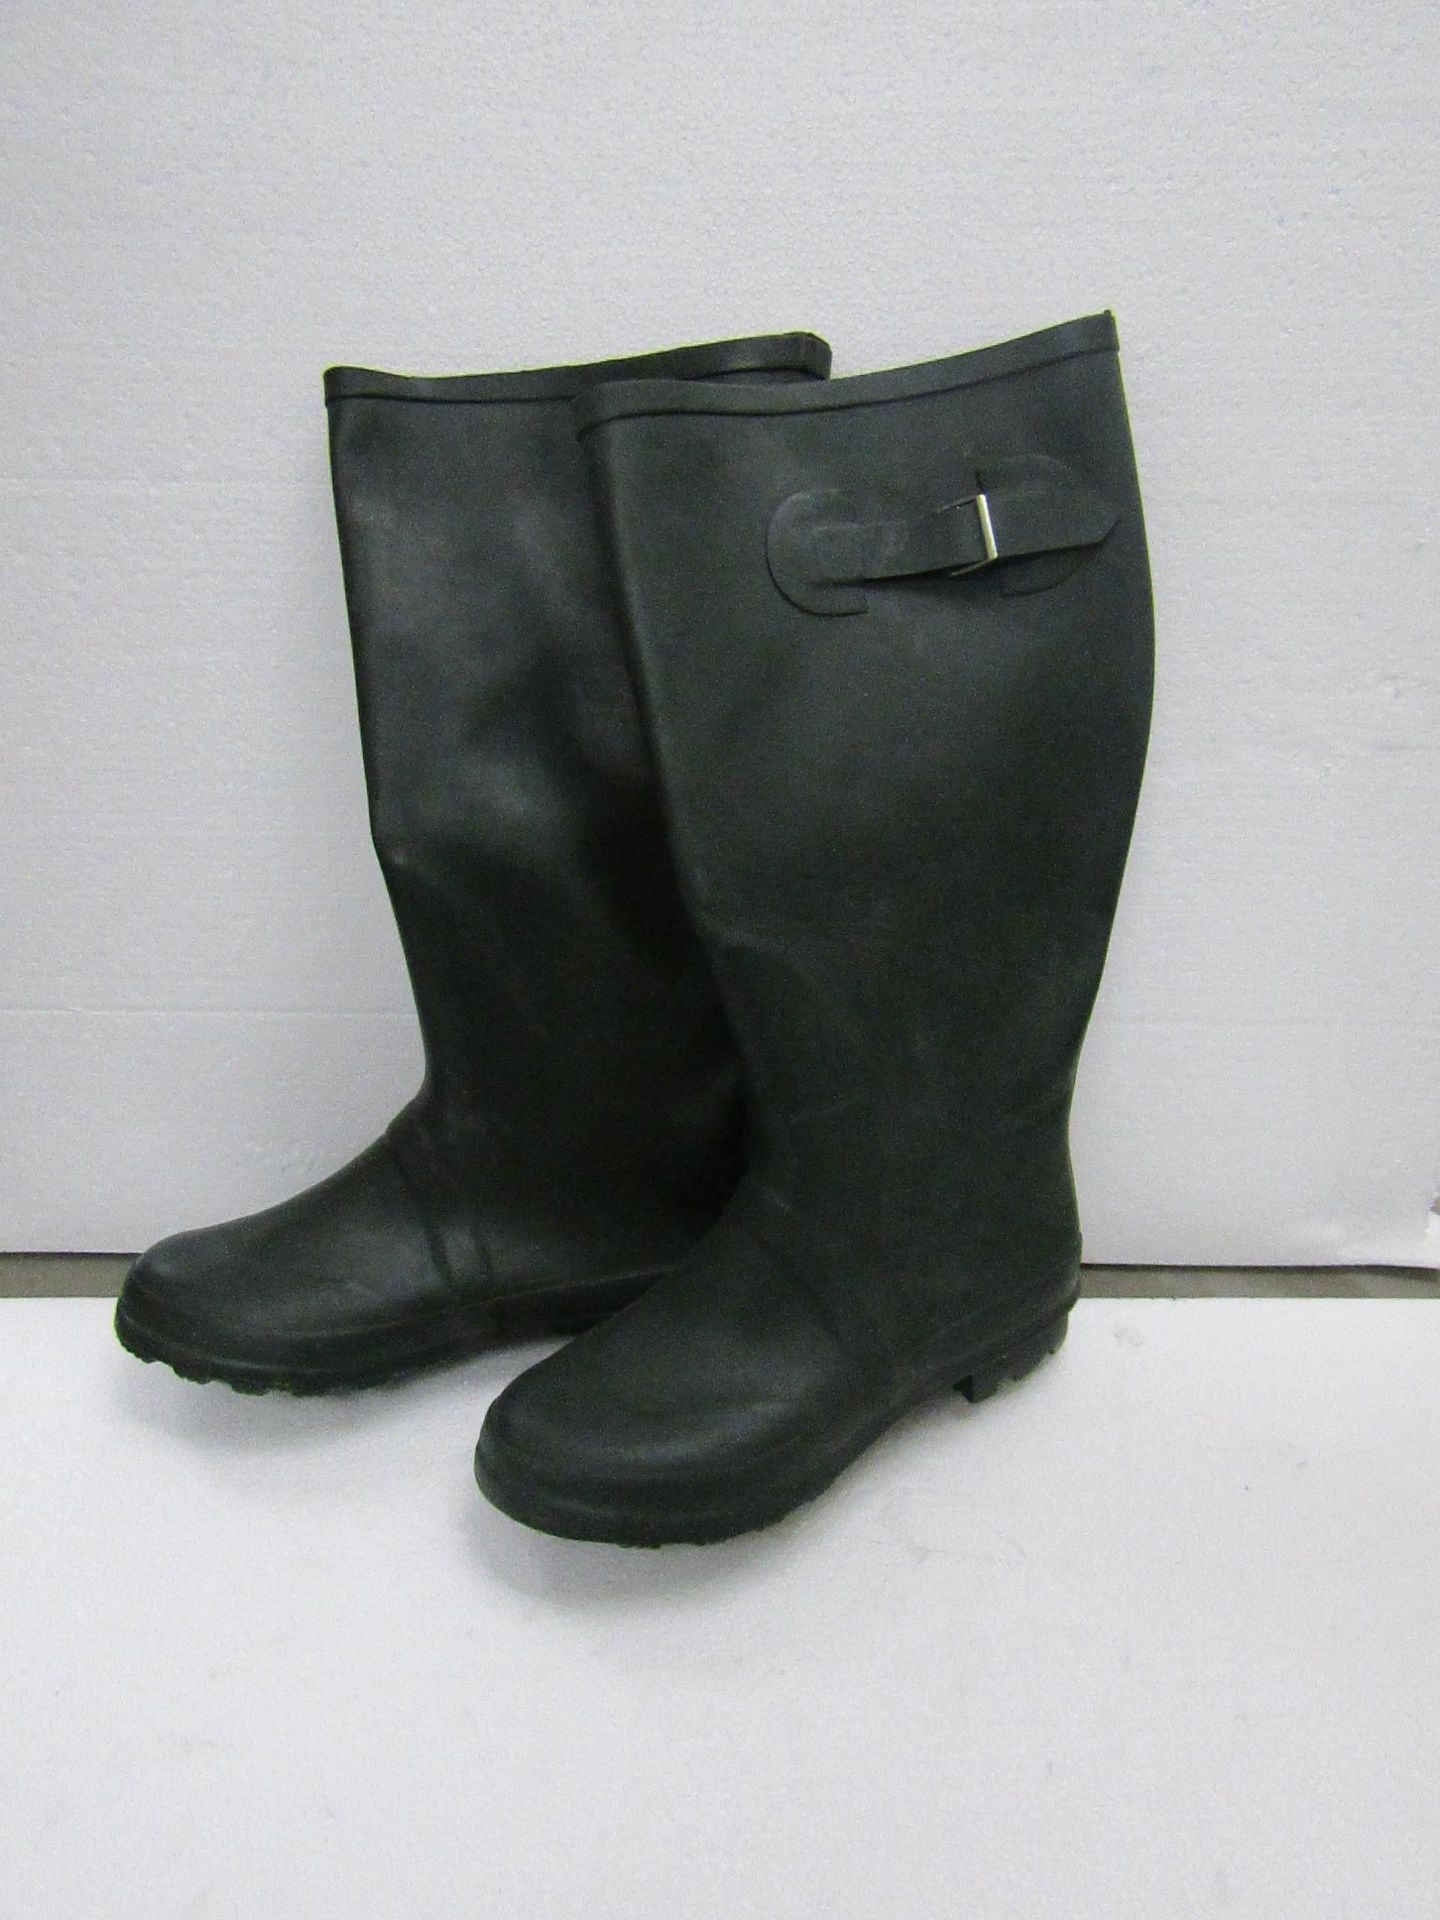 Green Rubber Boots size 37 new see image